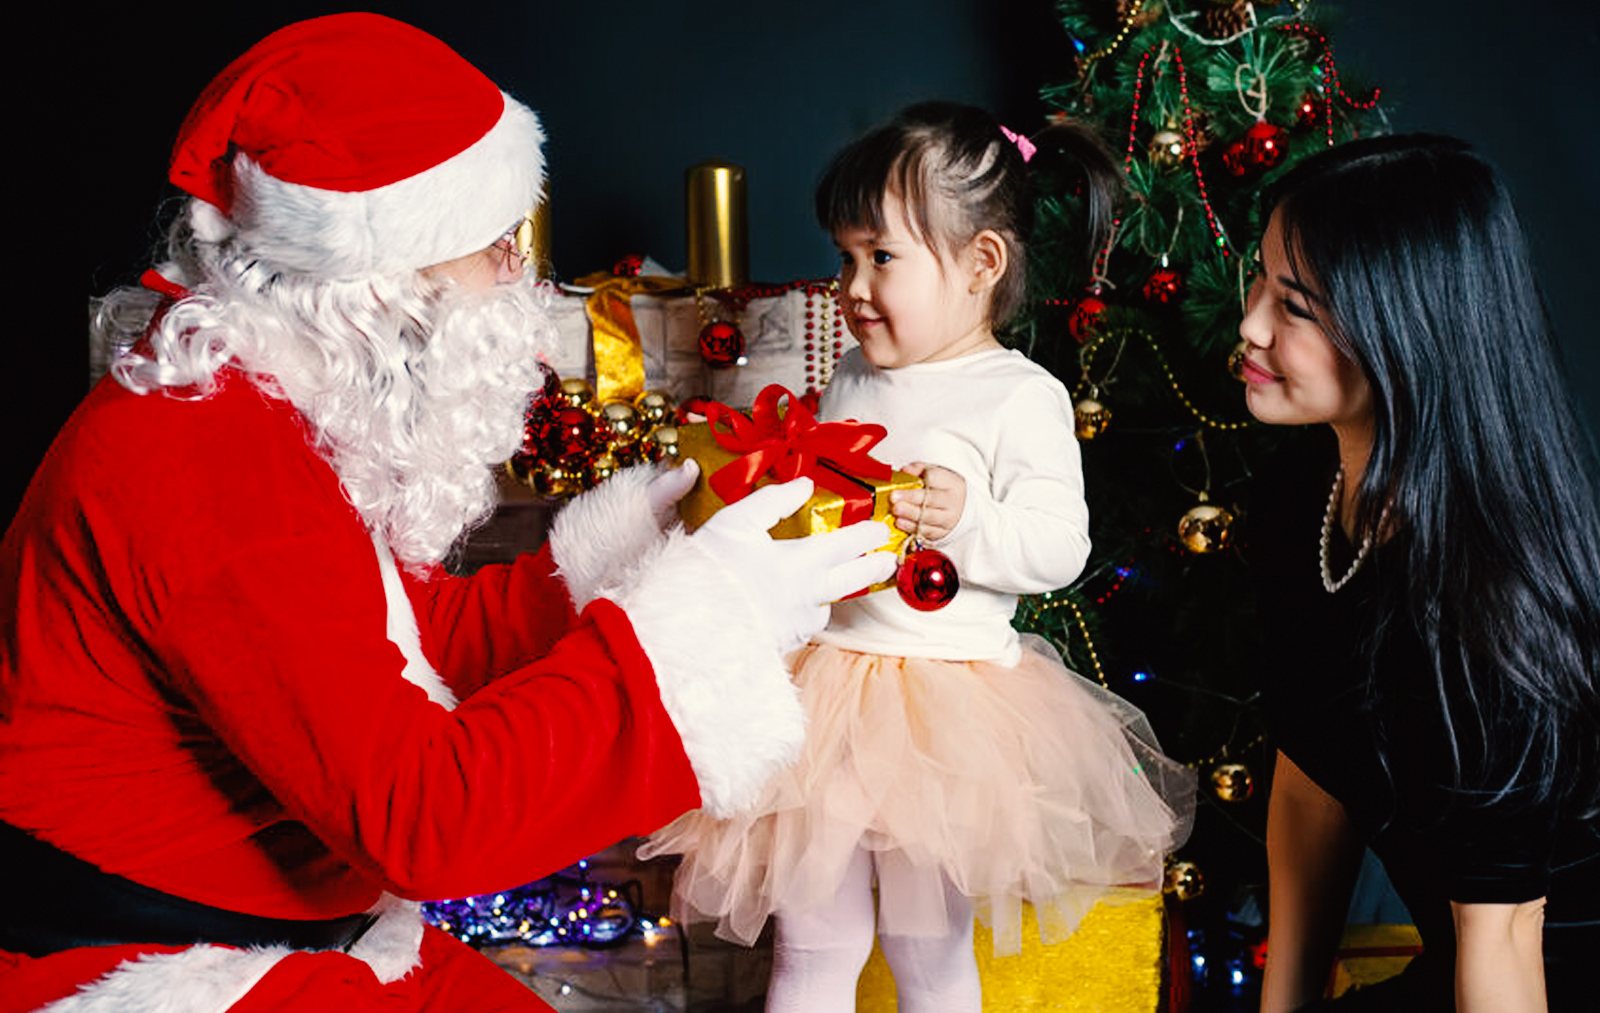 young girl meeting Santa Claus with mother